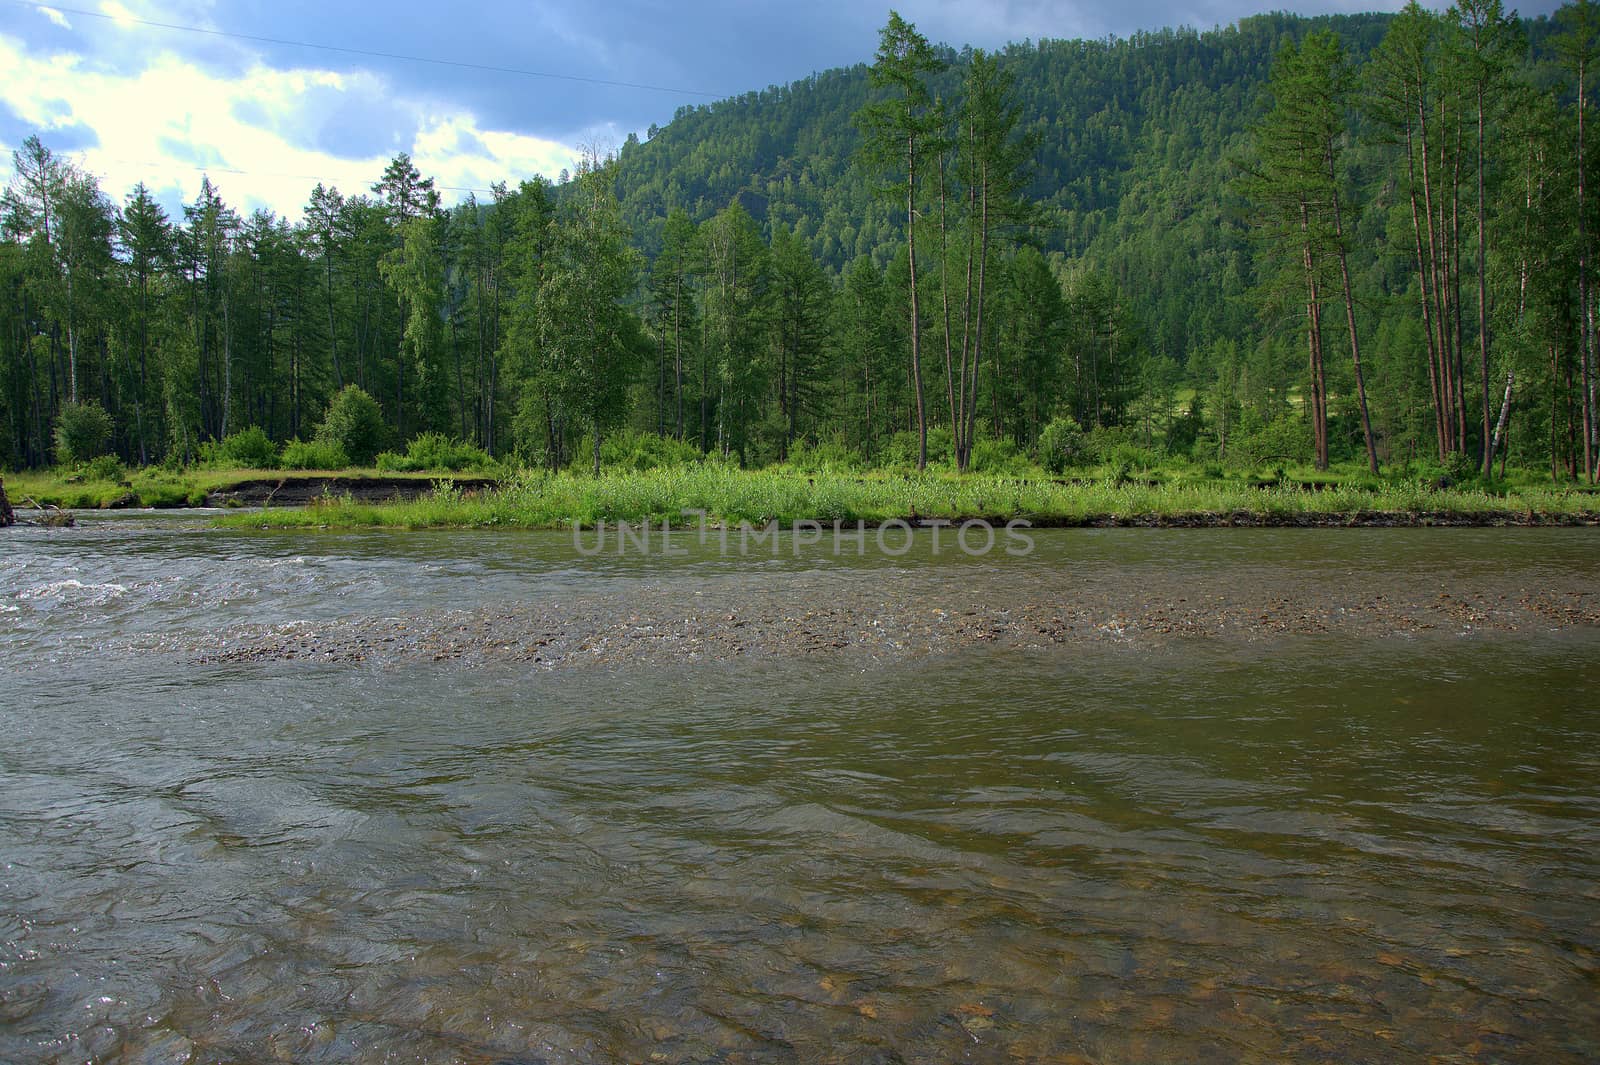 A fragment of a river flowing at the foot of high mountains overgrown with coniferous forest. Altai, Siberia, Russia.